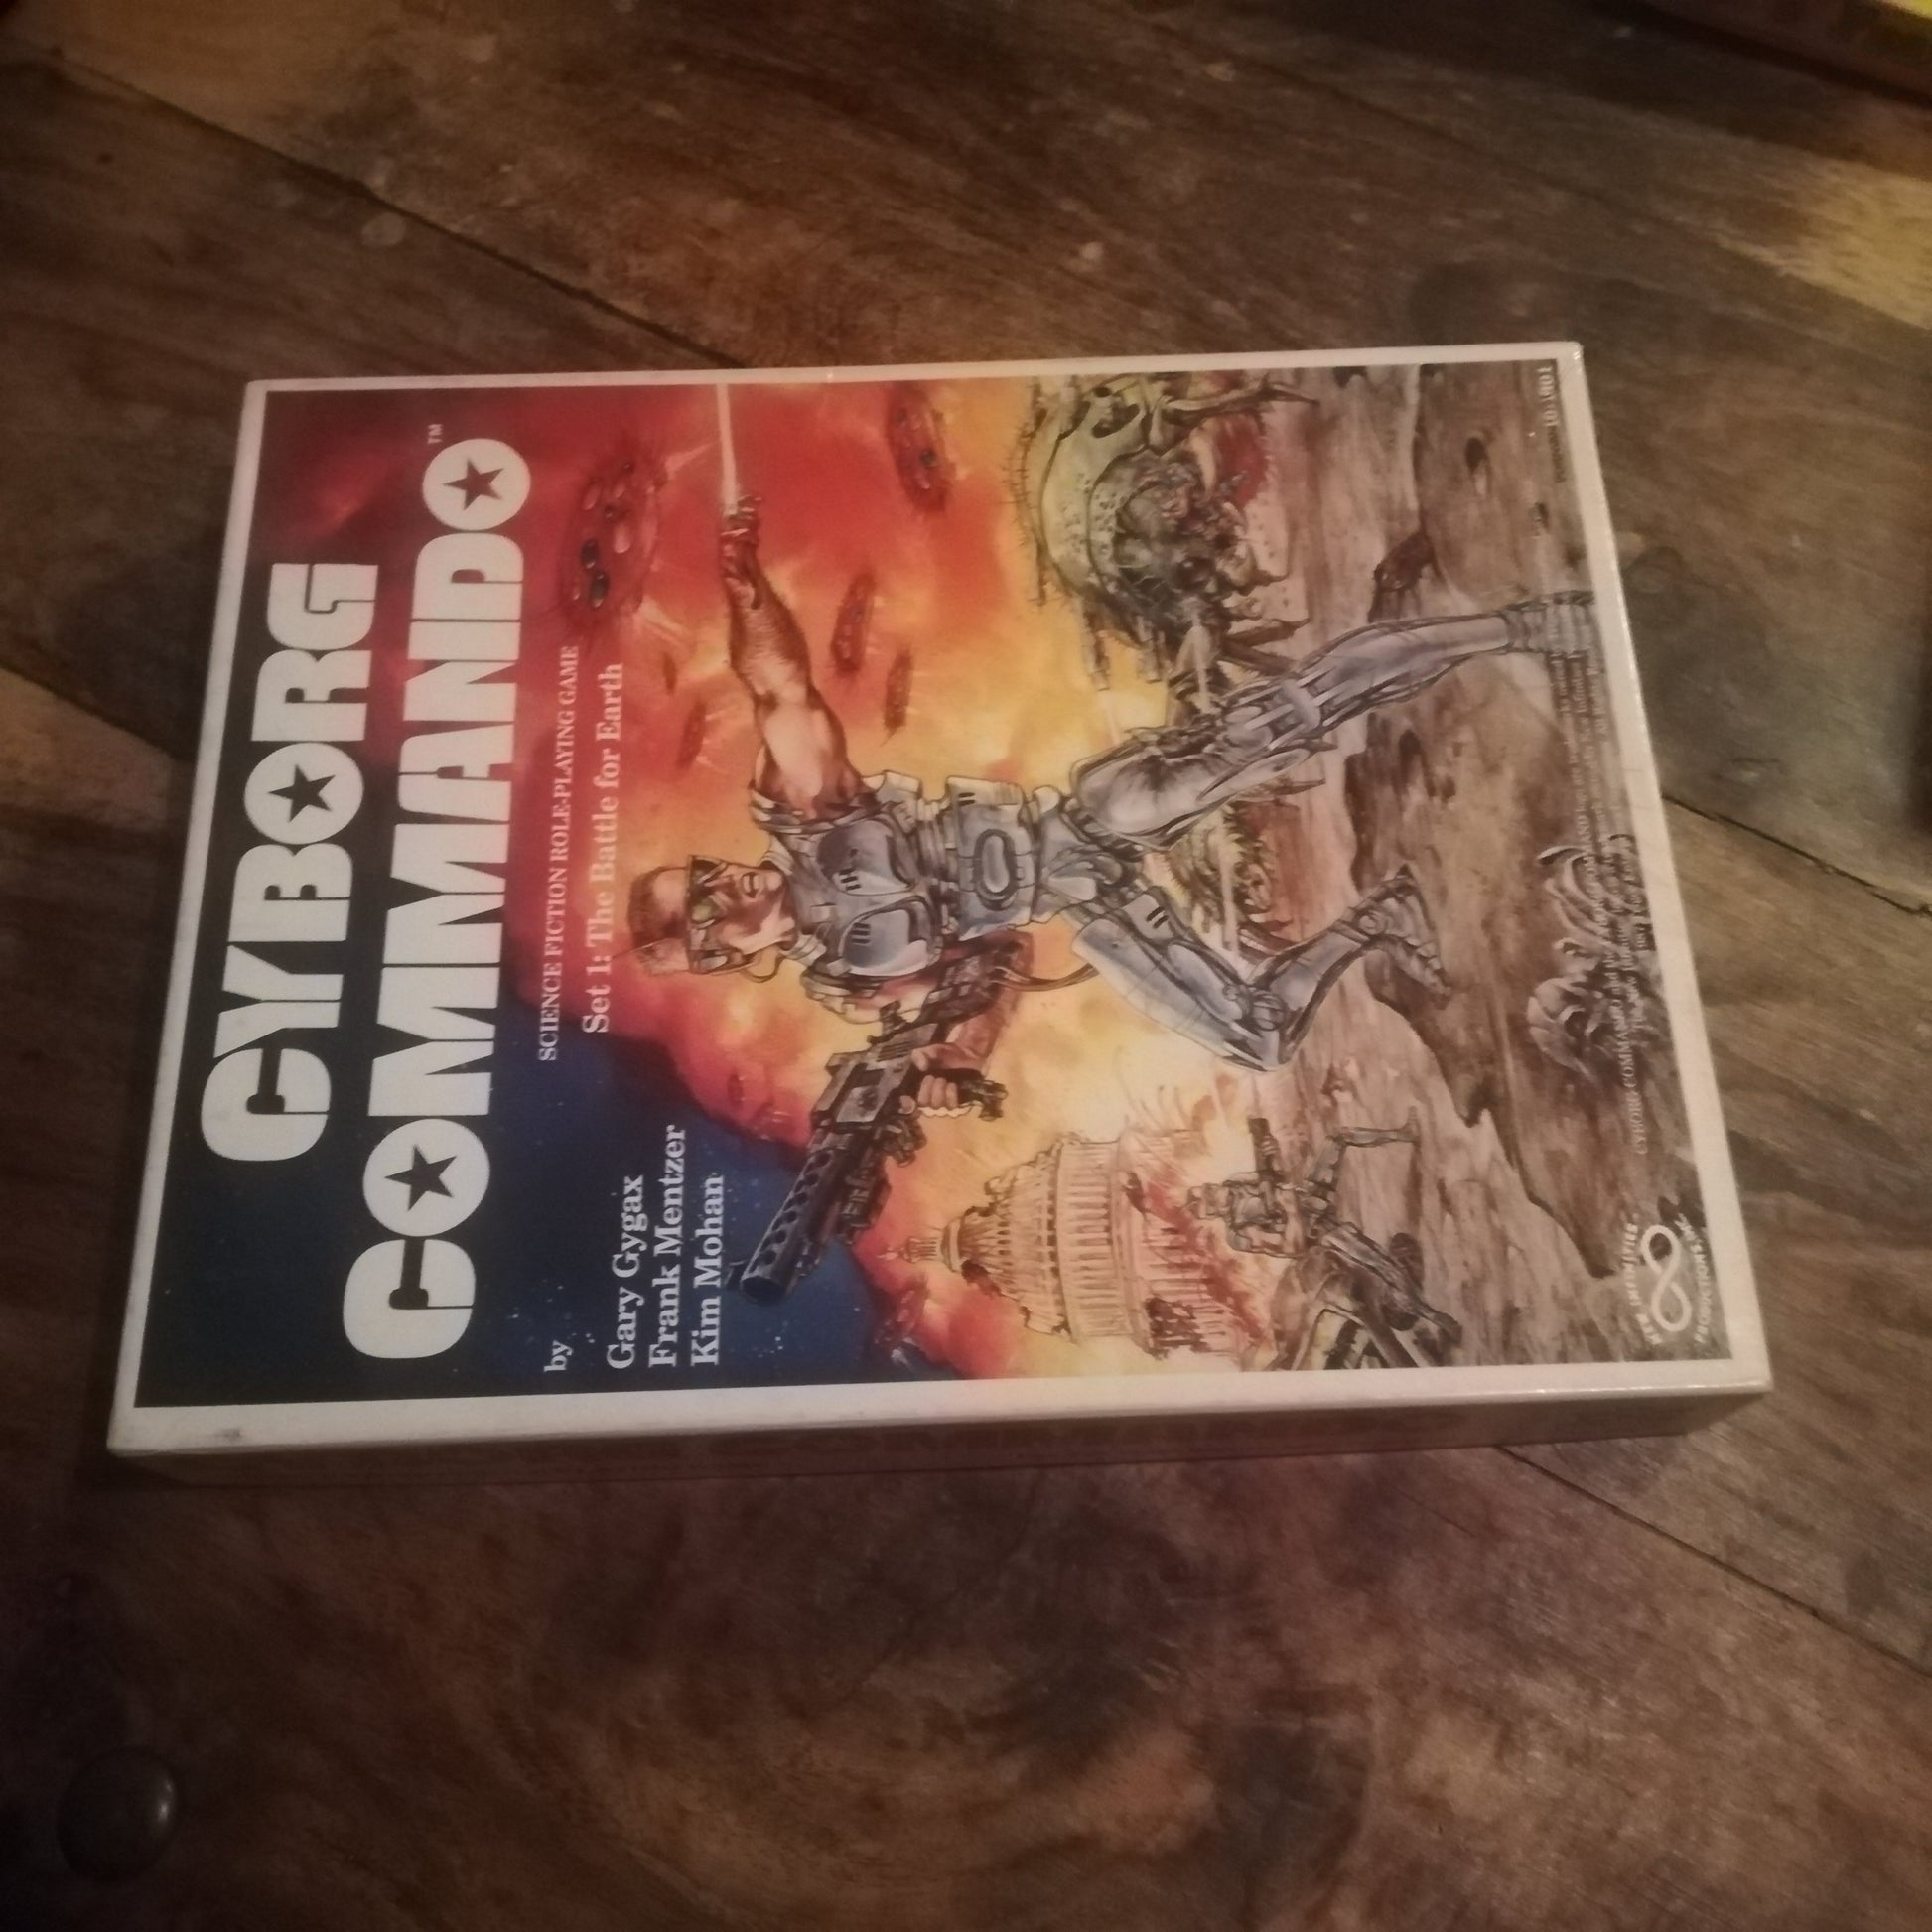 Cyborg Commando Boxed Rules Books Battle for Earth Box Set - AllRoleplaying.com